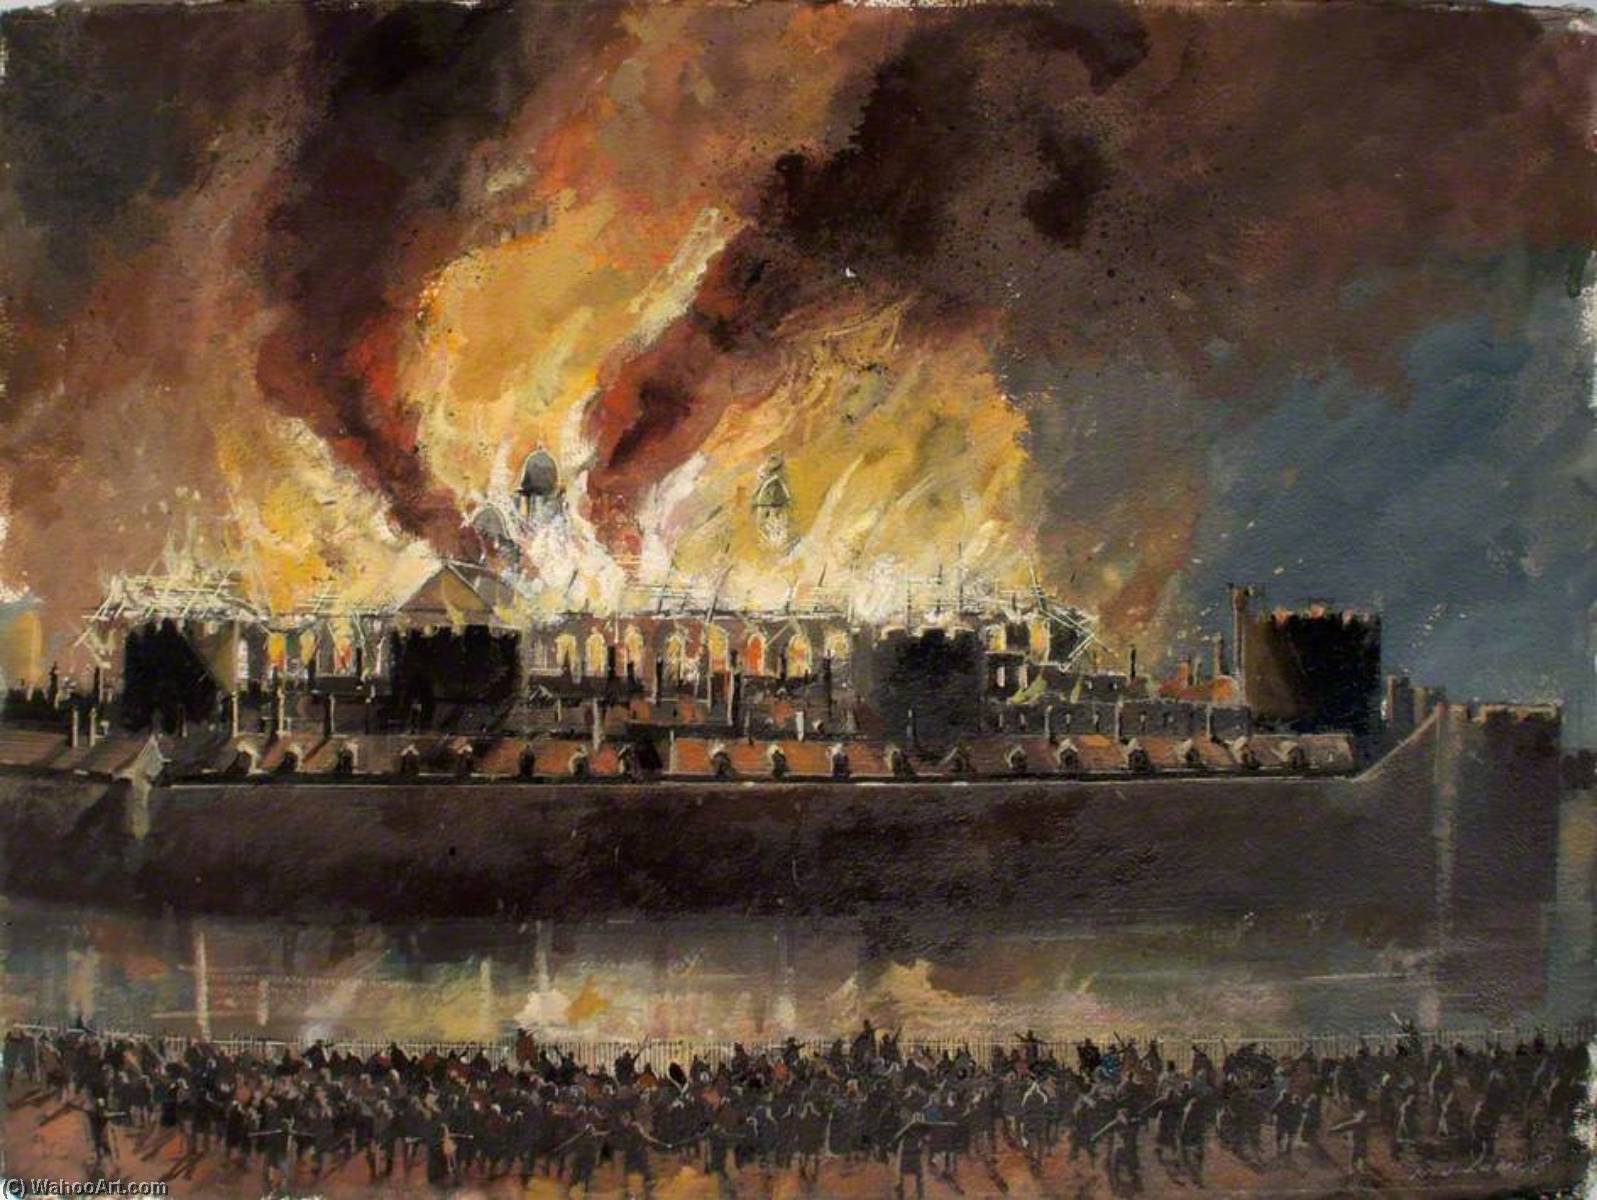 WikiOO.org - Encyclopedia of Fine Arts - Festés, Grafika Ivan Lapper - Reconstructed View of the Tower of London with the Grand Storehouse on Fire, 1841